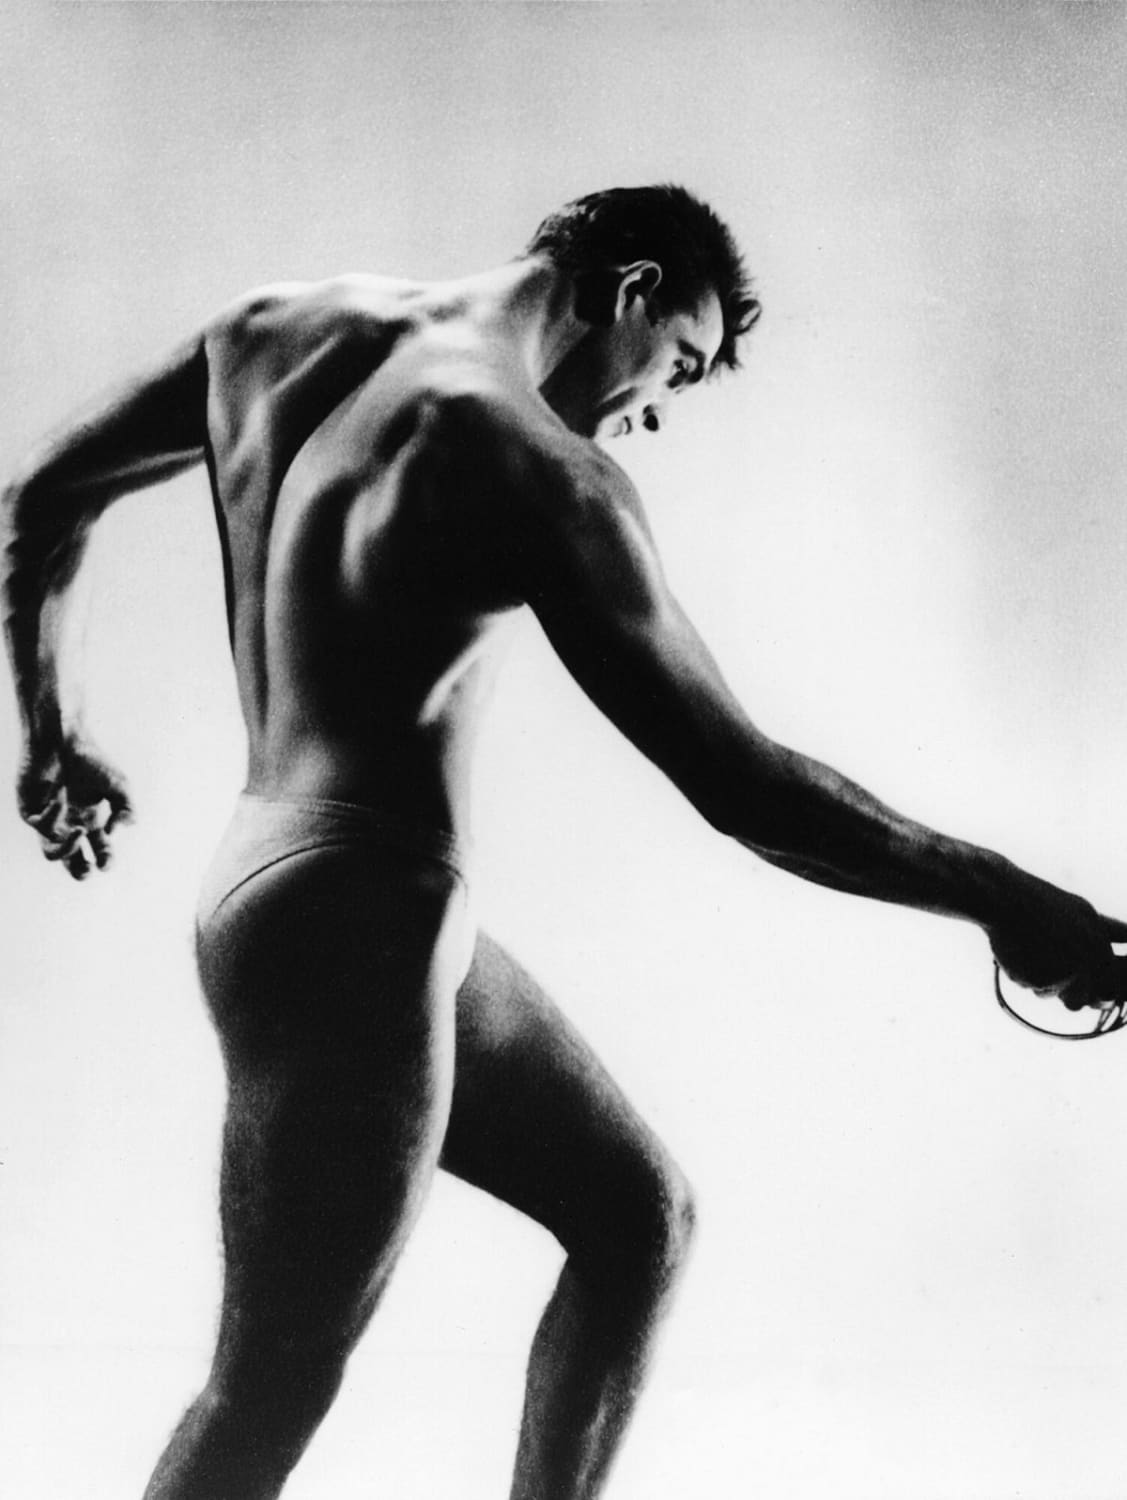 Sean Connery finished third in the Mr. Universe competition in 1953.